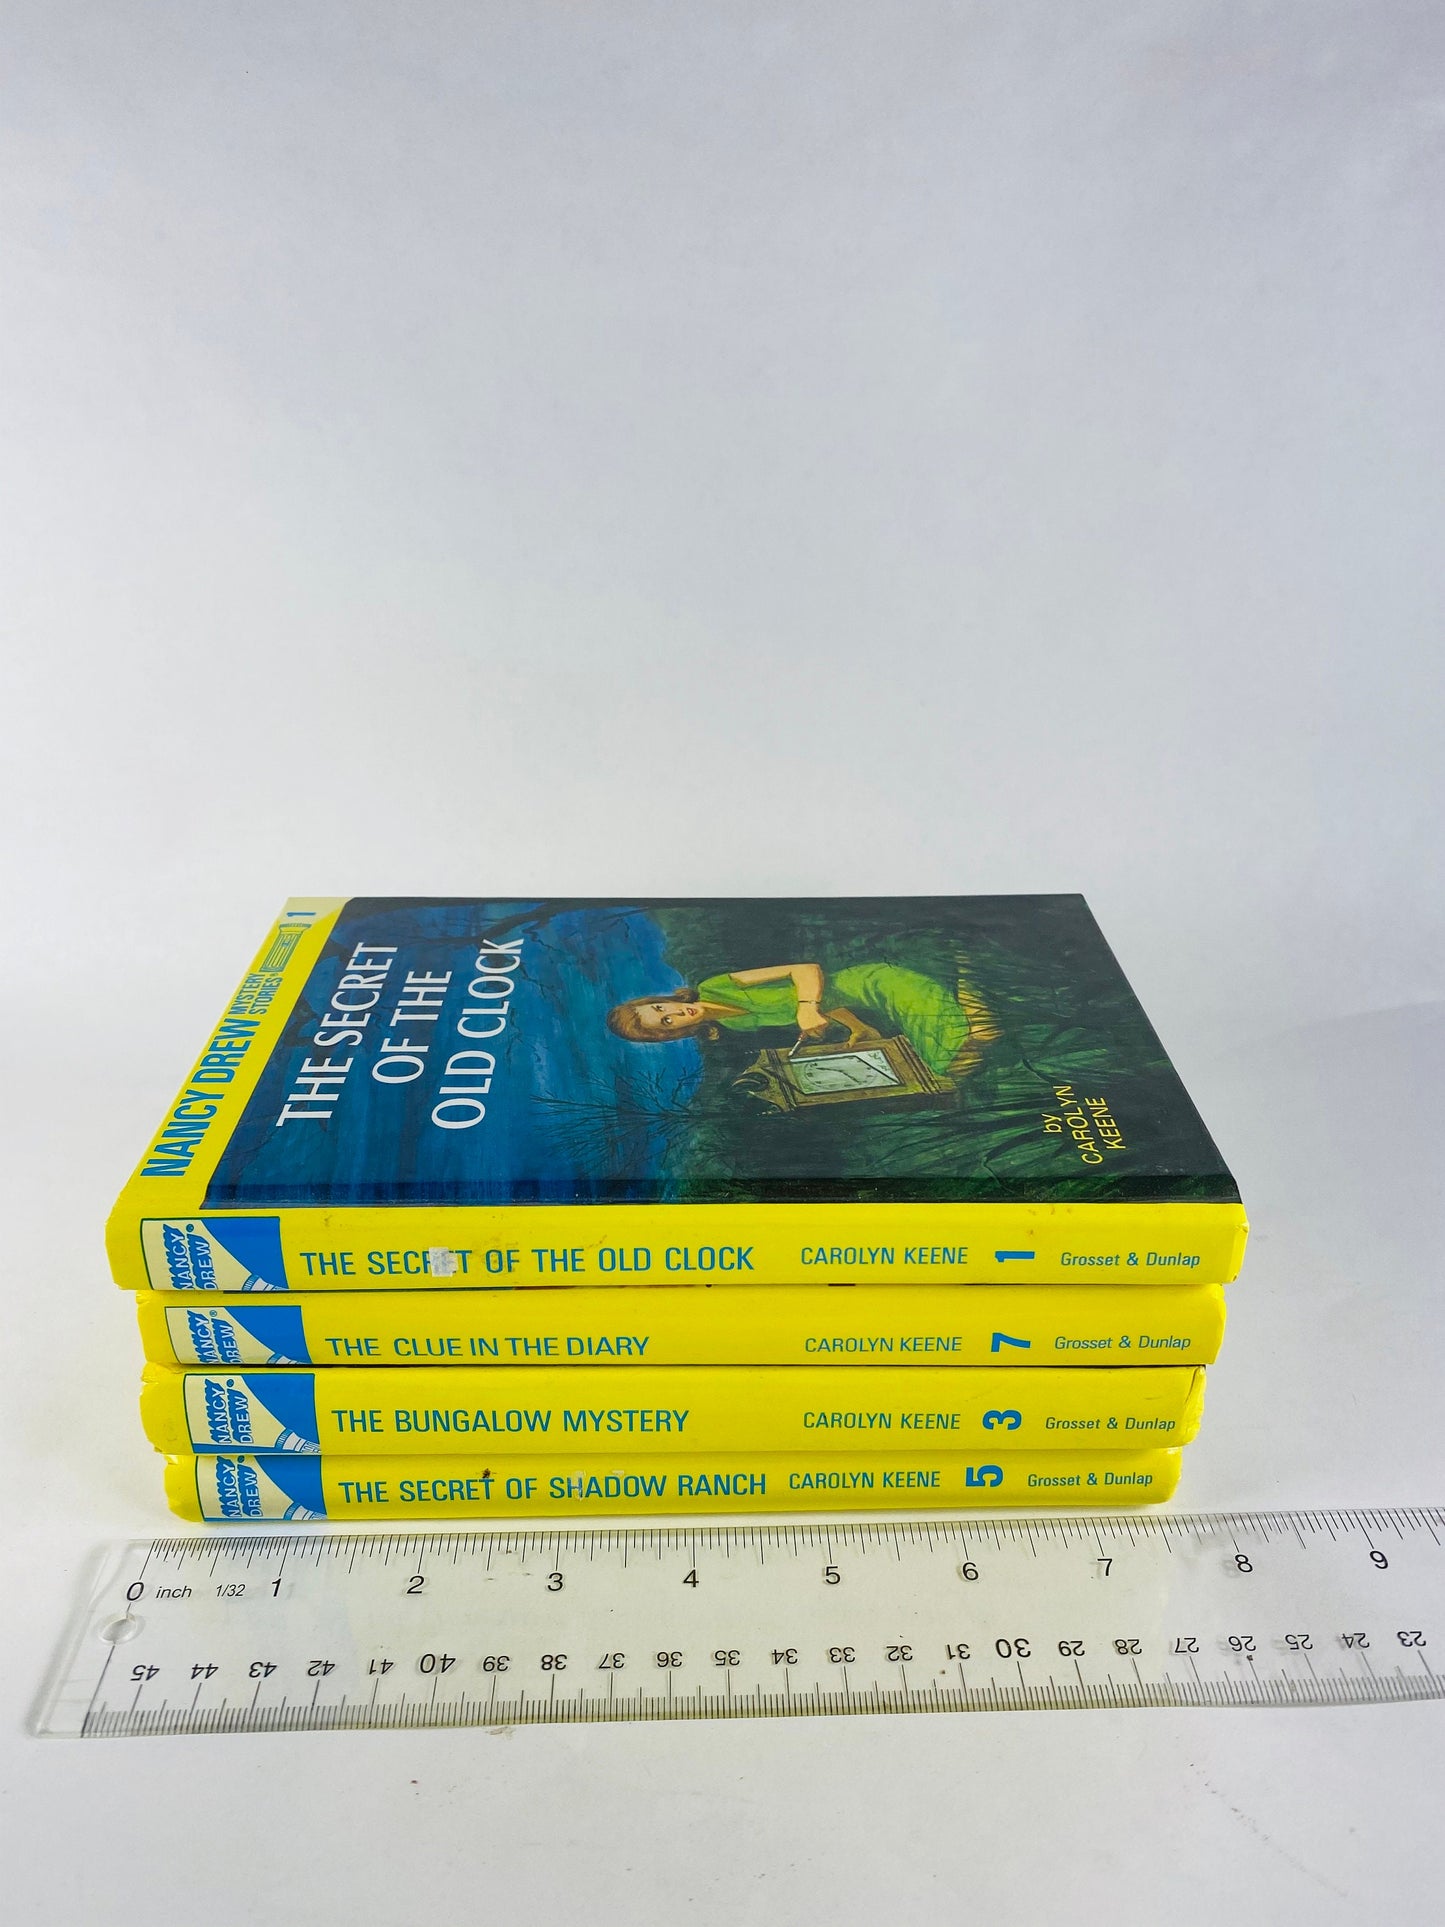 Nancy Drew Mystery Stories vintage books in good condition by Carolyn Keene. Glossy yellow spine hardcovers. home reading elementary middle